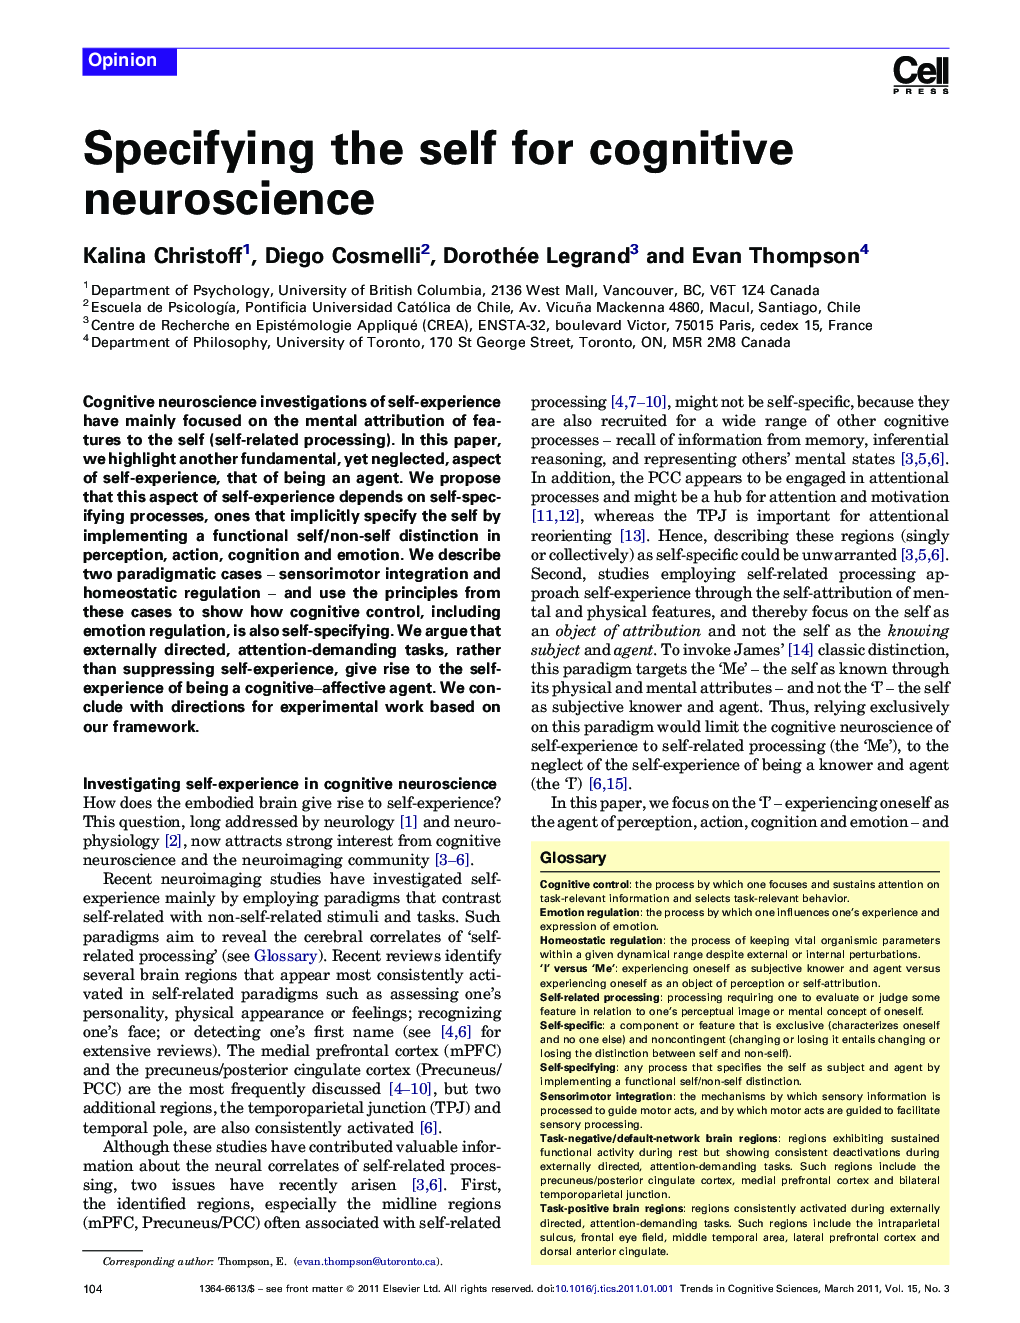 Specifying the self for cognitive neuroscience